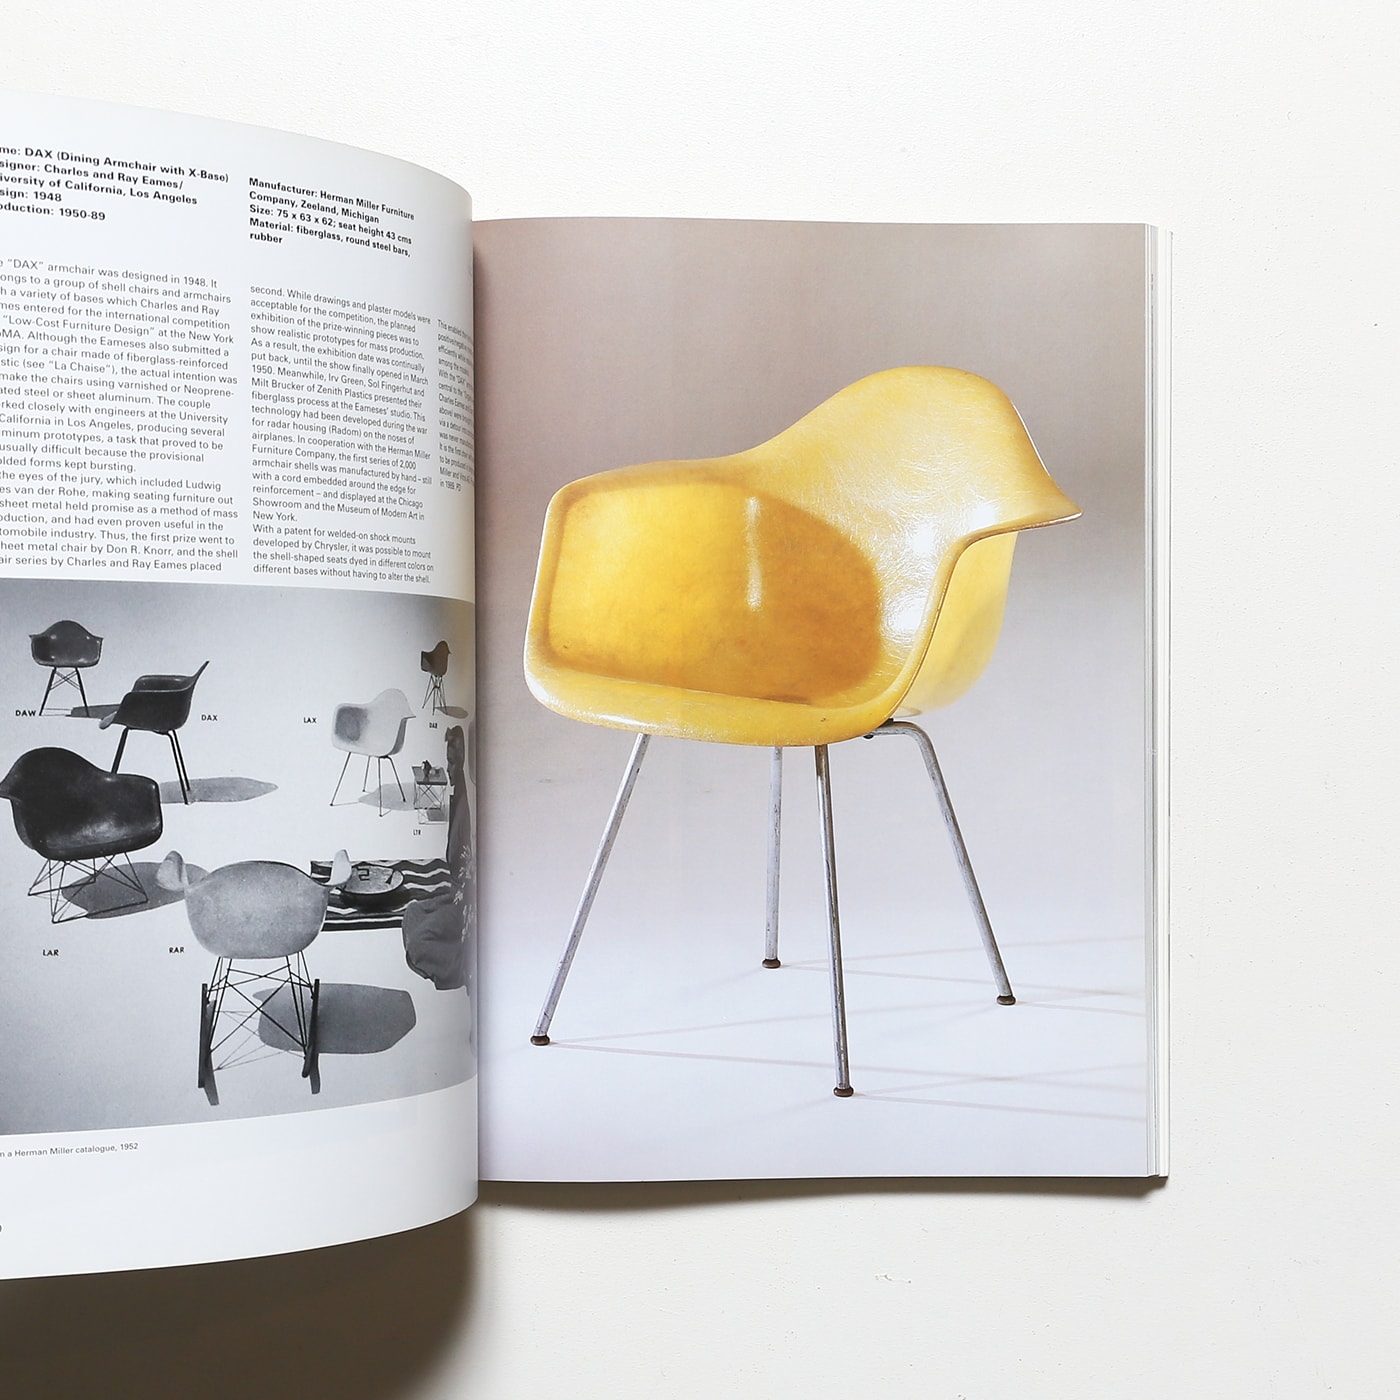 100 Masterpieces from the Vitra Design Museum Collection